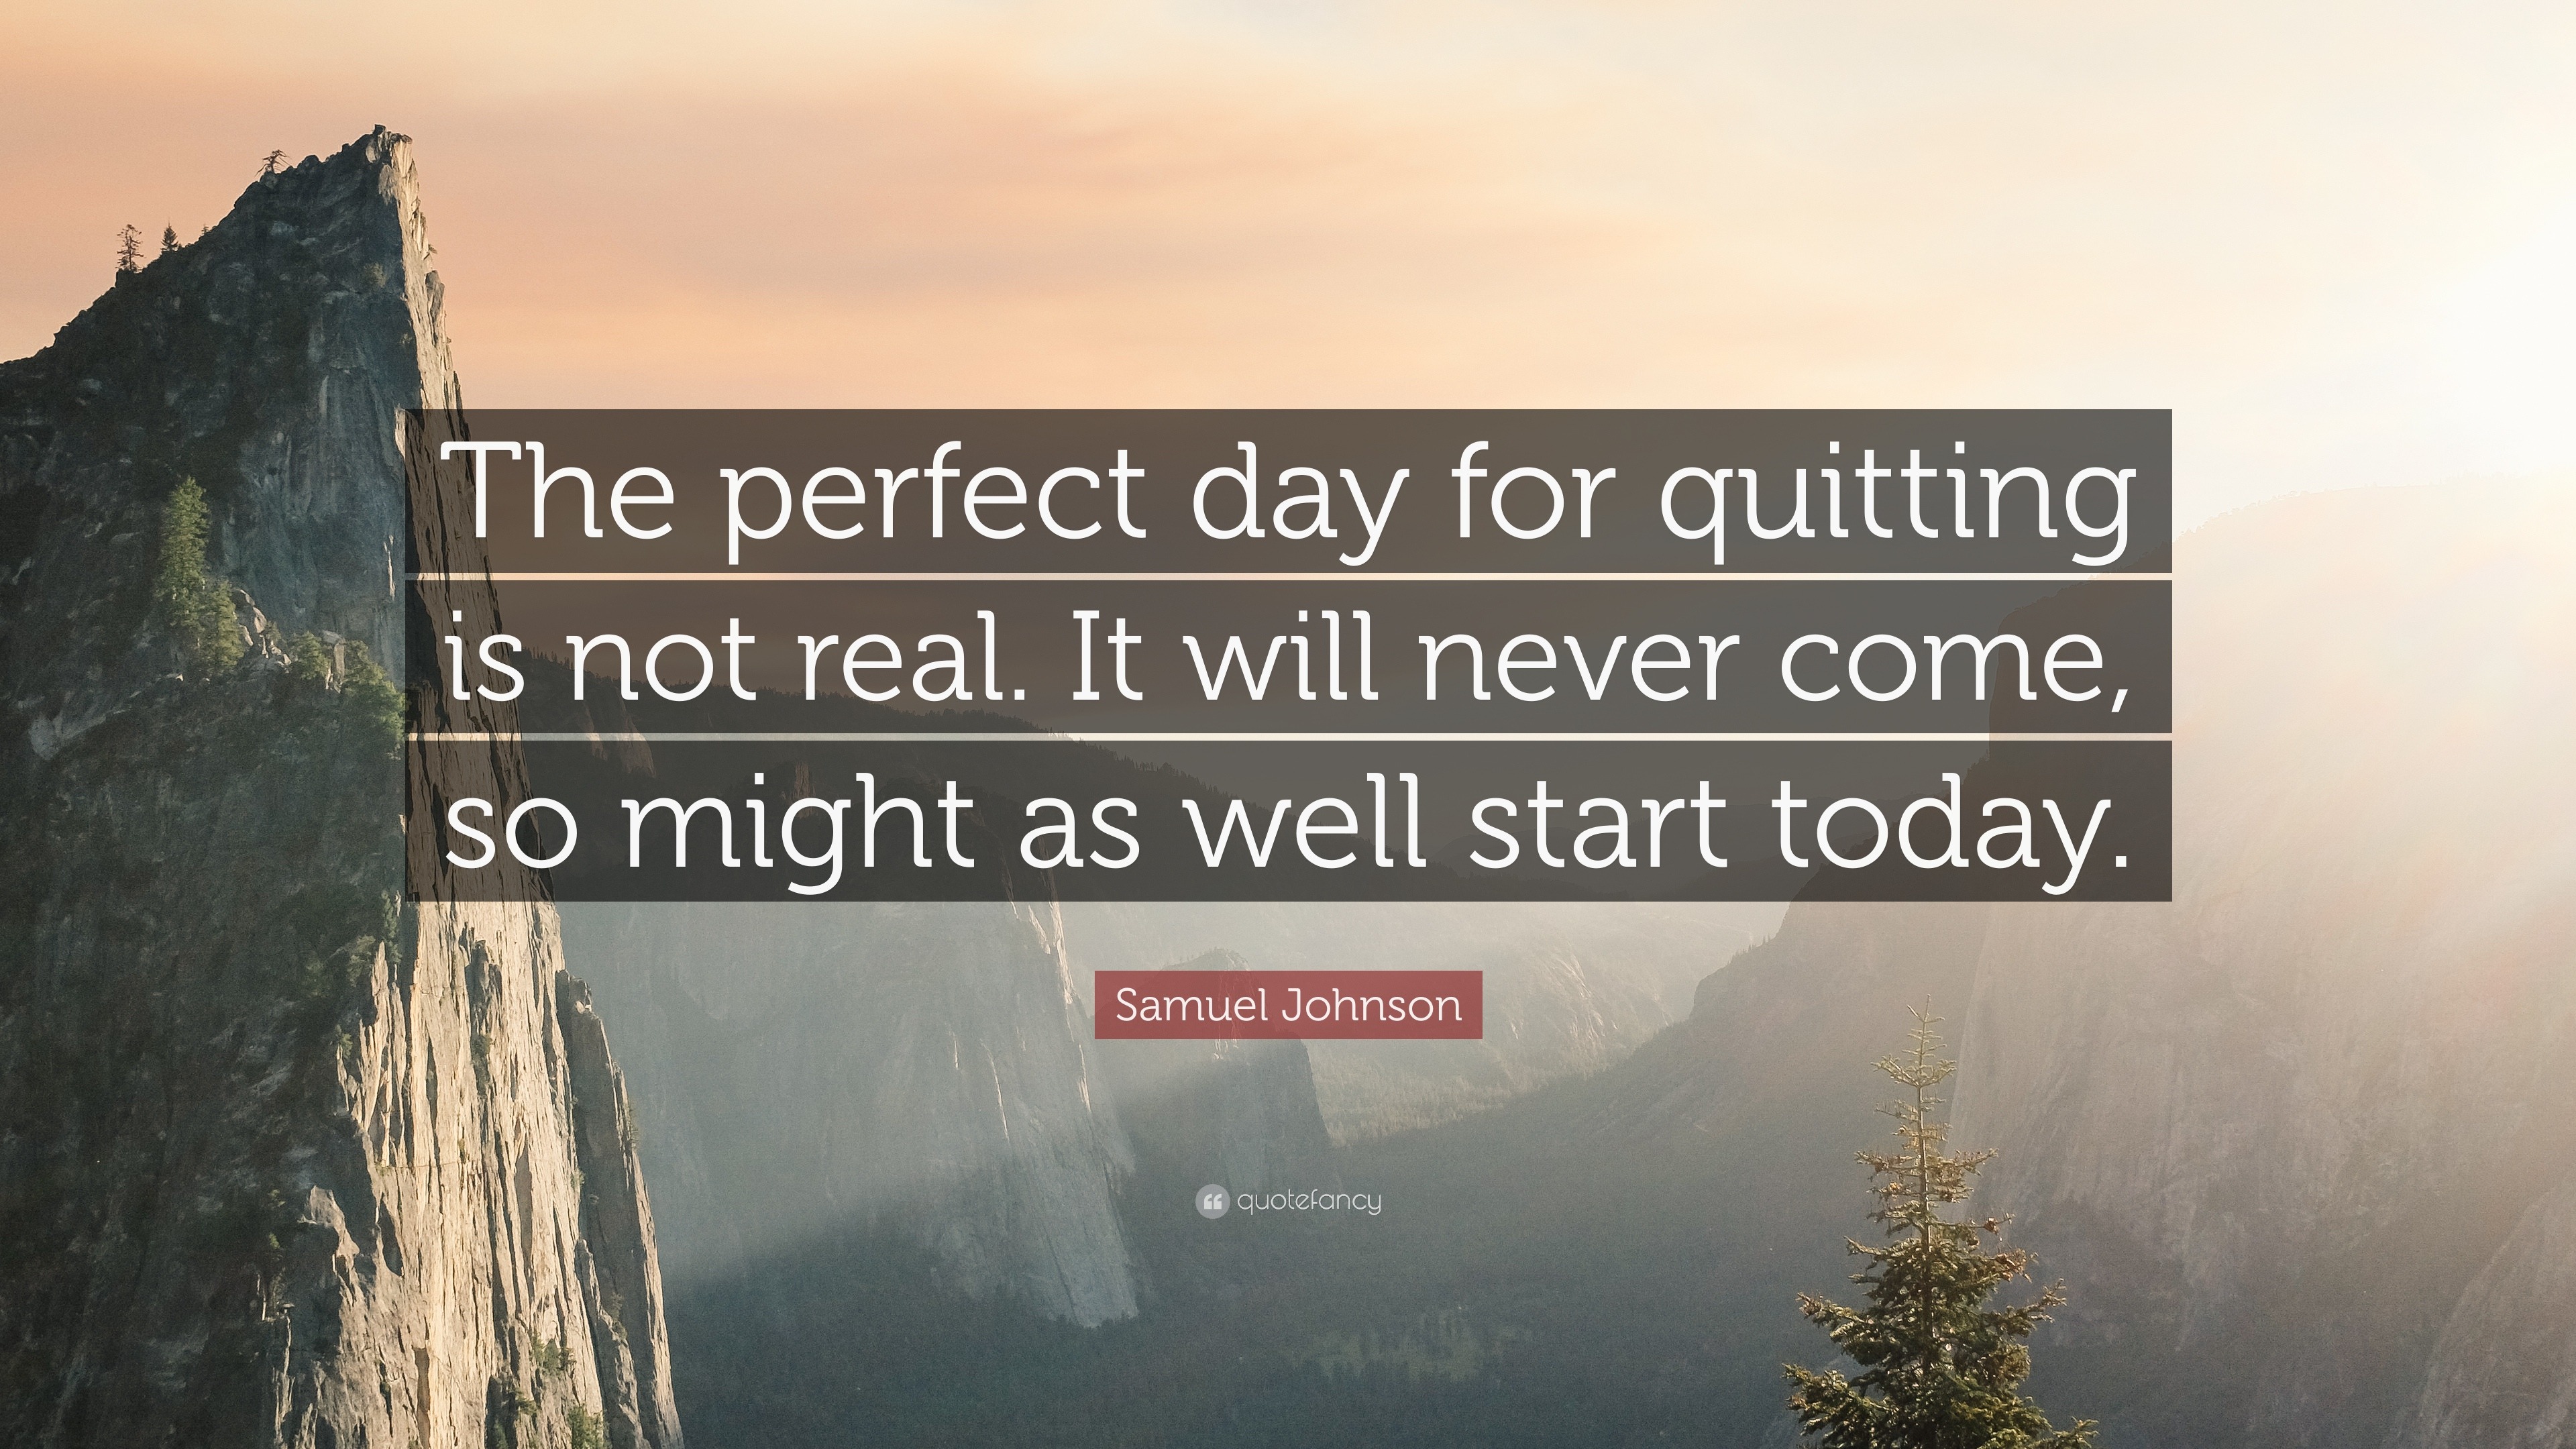 Samuel Johnson Quote: “The perfect day for quitting is not real. It